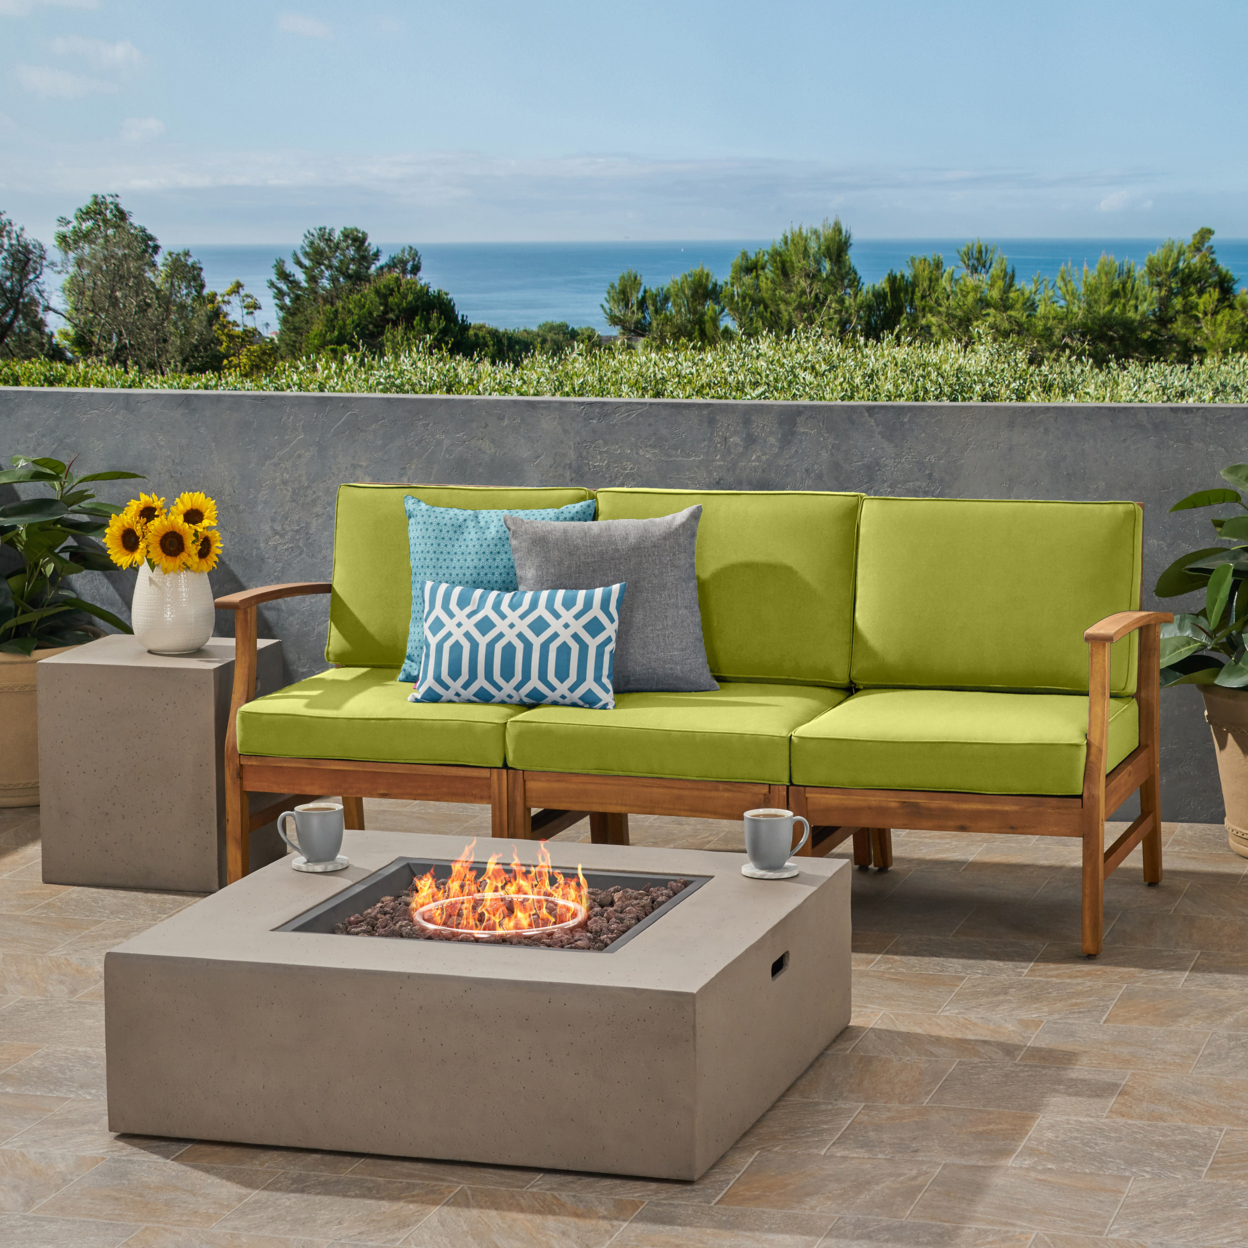 Sydney Outdoor 3 Seater Acacia Wood Sofa Set With Rectangular Fire Table And Tank Holder - Teak + Creme + Light Gray